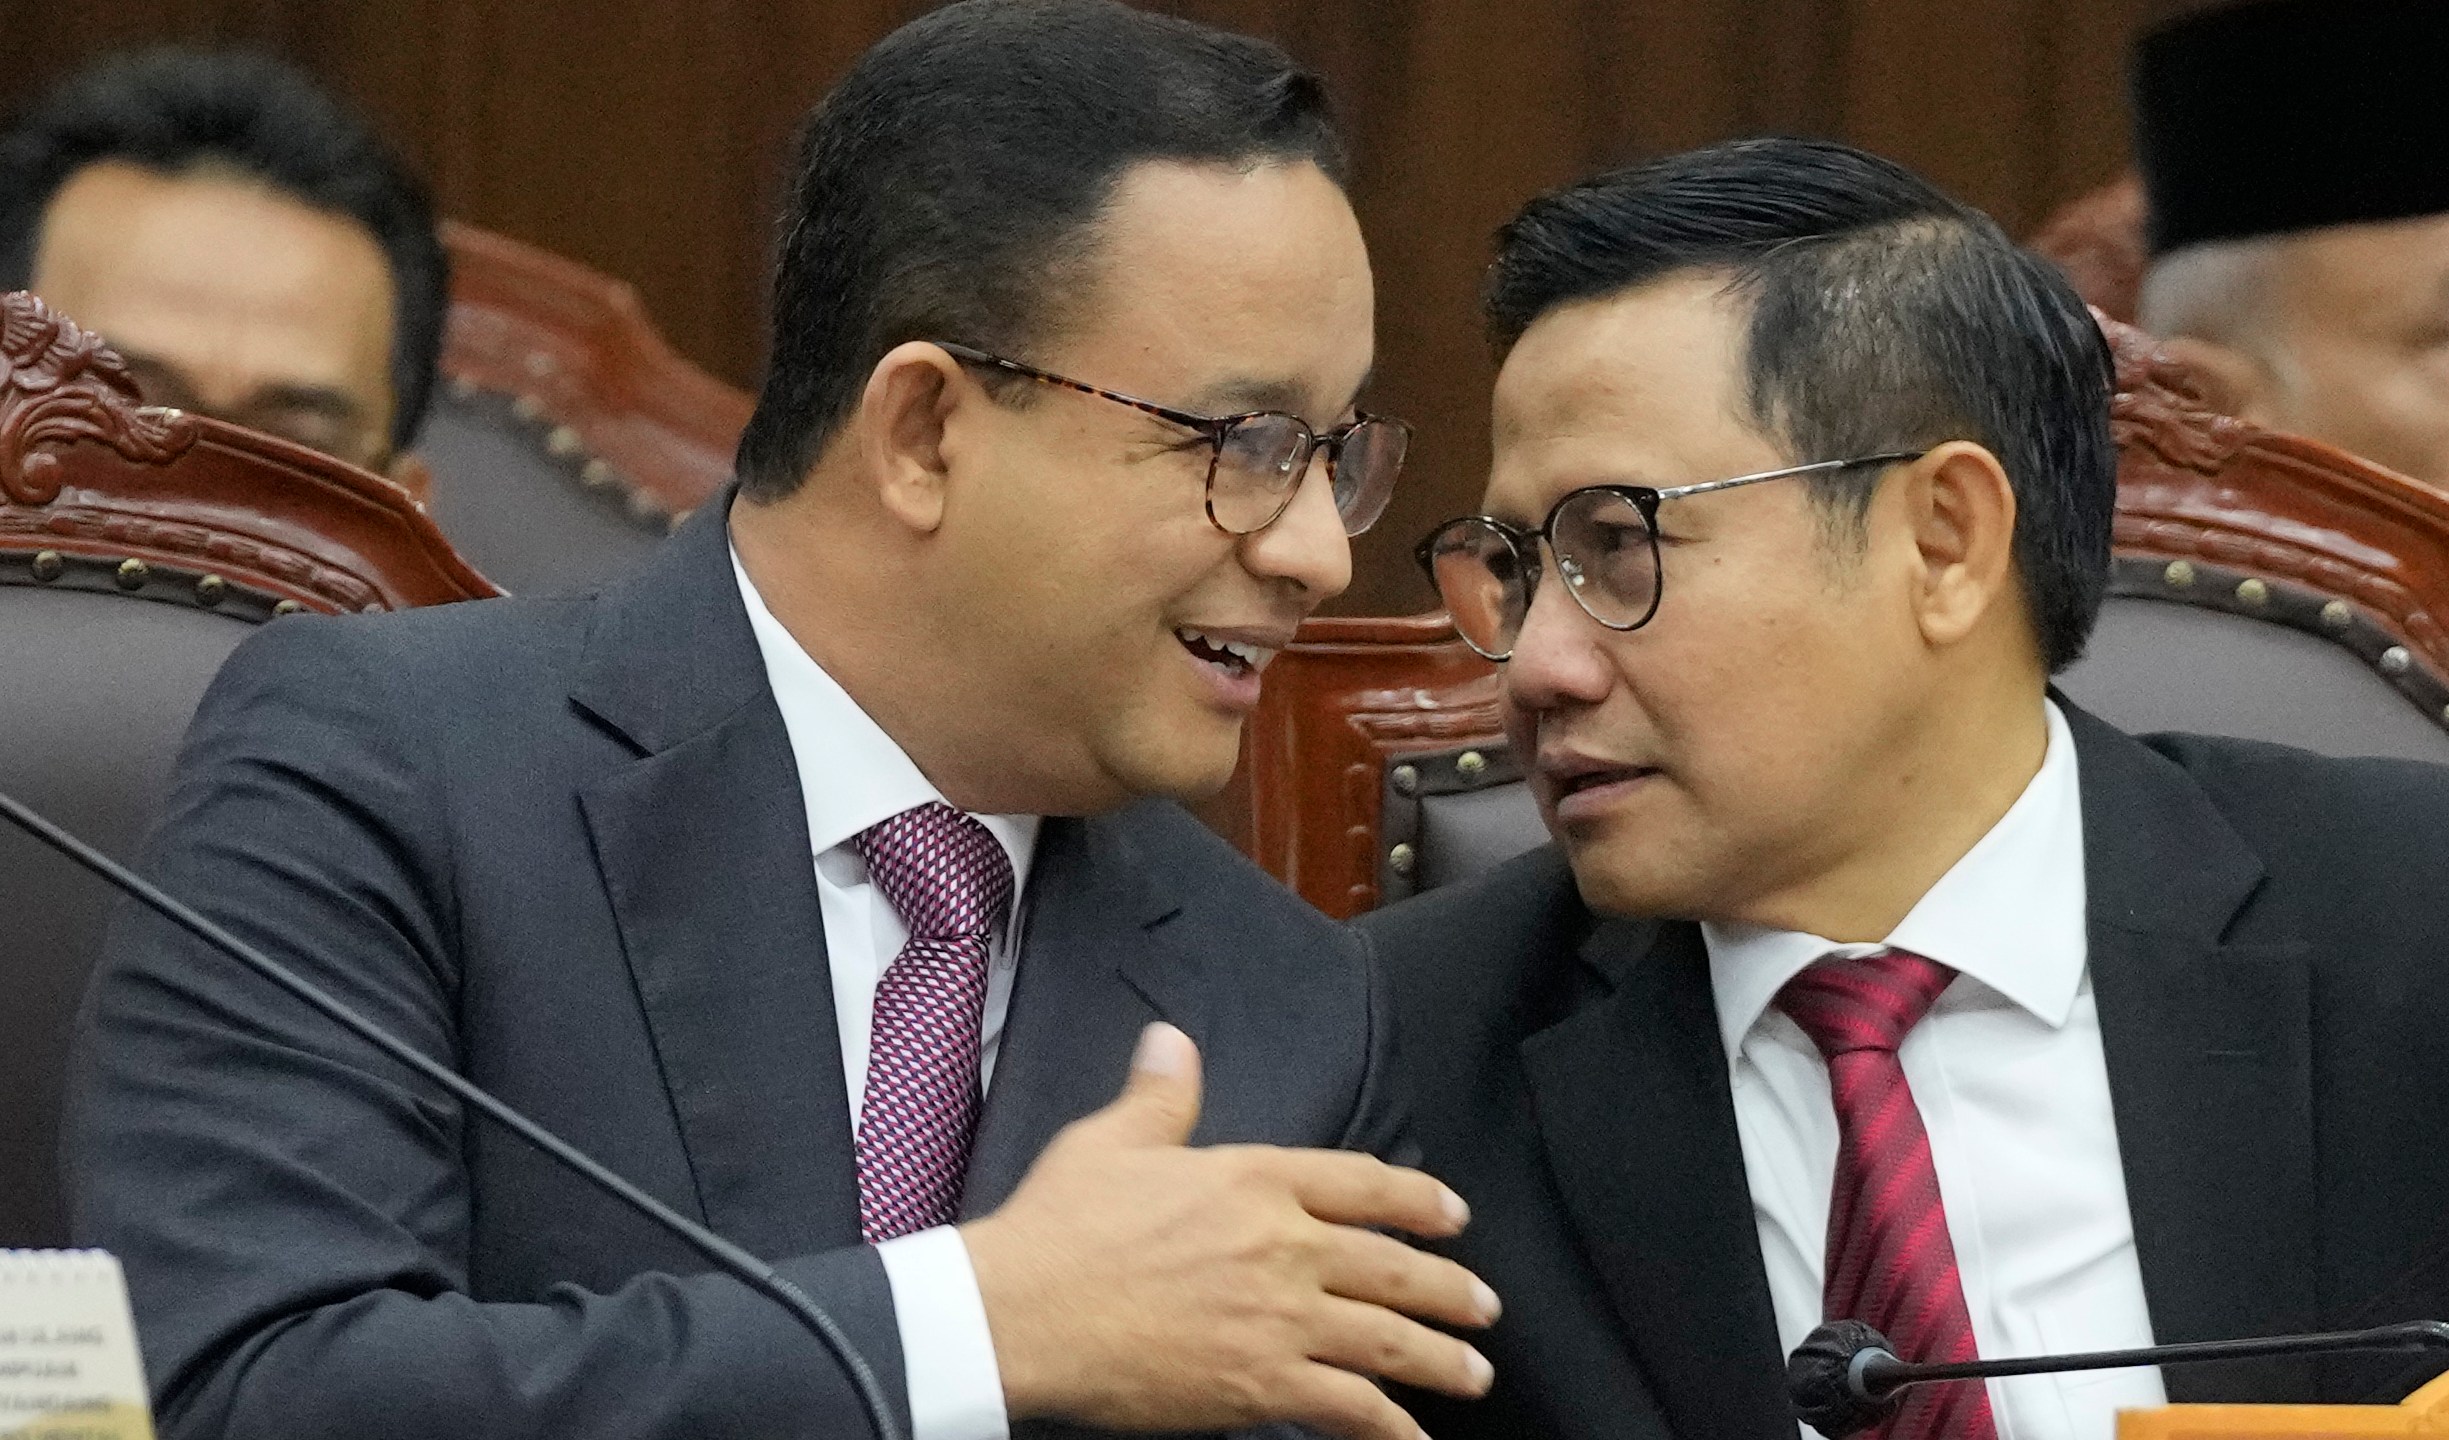 Losing presidential candidate Anies Baswedan, left, talks with his running mate Muhaimin Iskandar during the first hearing of his legal challenge to the Feb. 14 presidential election alleging widespread fraud, at the Constitutional Court in Jakarta, Indonesia, Wednesday, March 27, 2024. Defense Minister Prabowo Subianto, who chose the son of the popular outgoing President Joko Widodo as his running mate, won the election by 58.6% of the votes, according to final results released by the Election Commission. (AP Photo/Dita Alangkara)